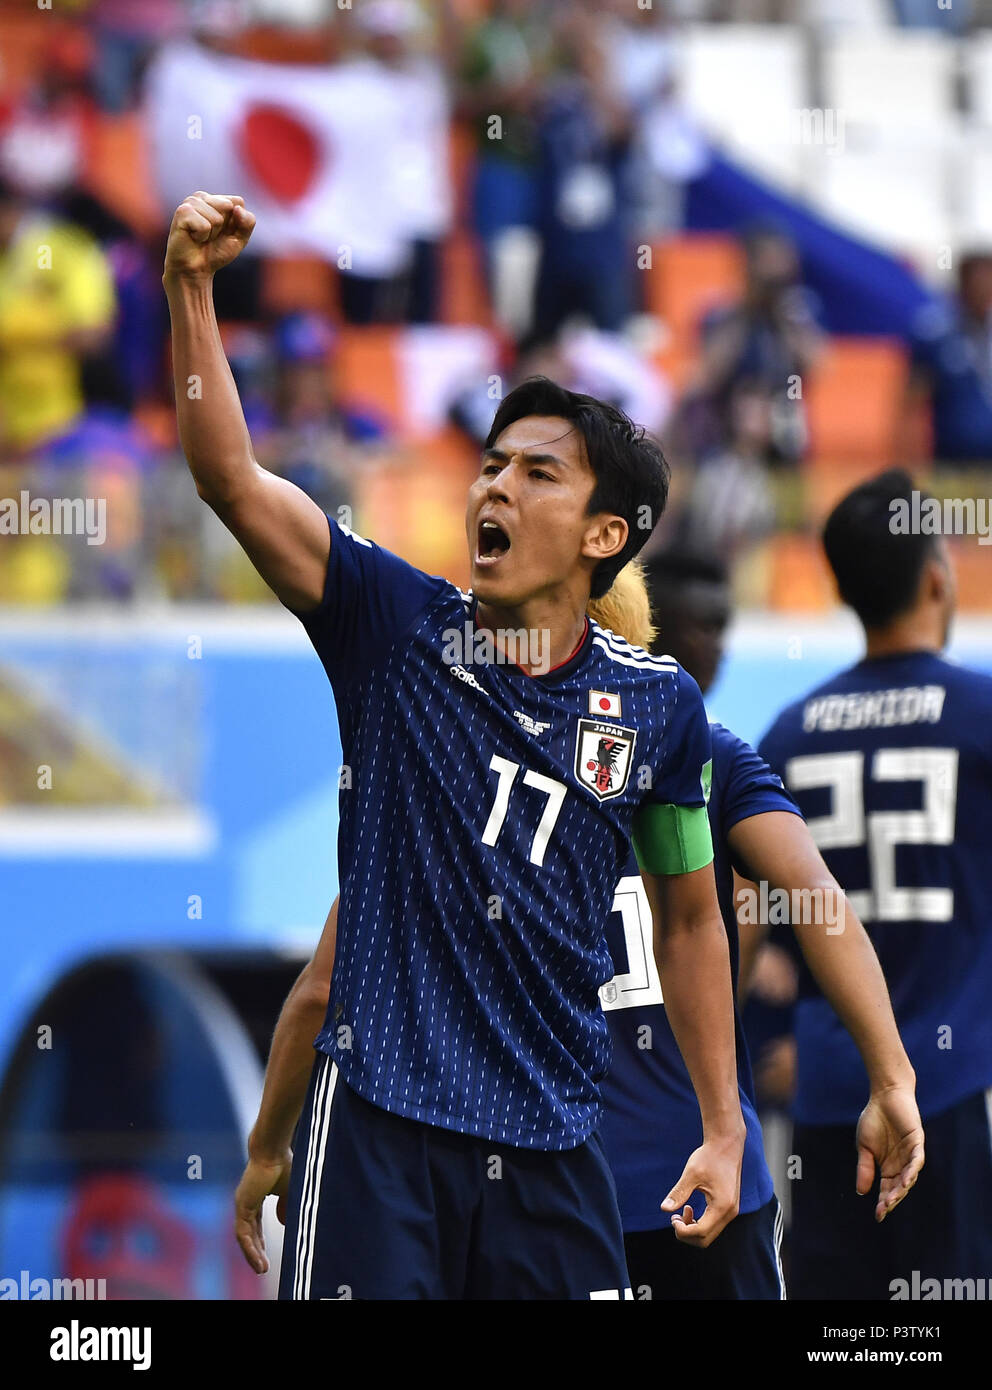 Saransk, Russia. 19th June, 2018. Makoto Hasebe of Japan celebrates victory after a Group H match between Colombia and Japan at the 2018 FIFA World Cup in Saransk, Russia, June 19, 2018. Japan won 2-1. Credit: He Canling/Xinhua/Alamy Live News Stock Photo